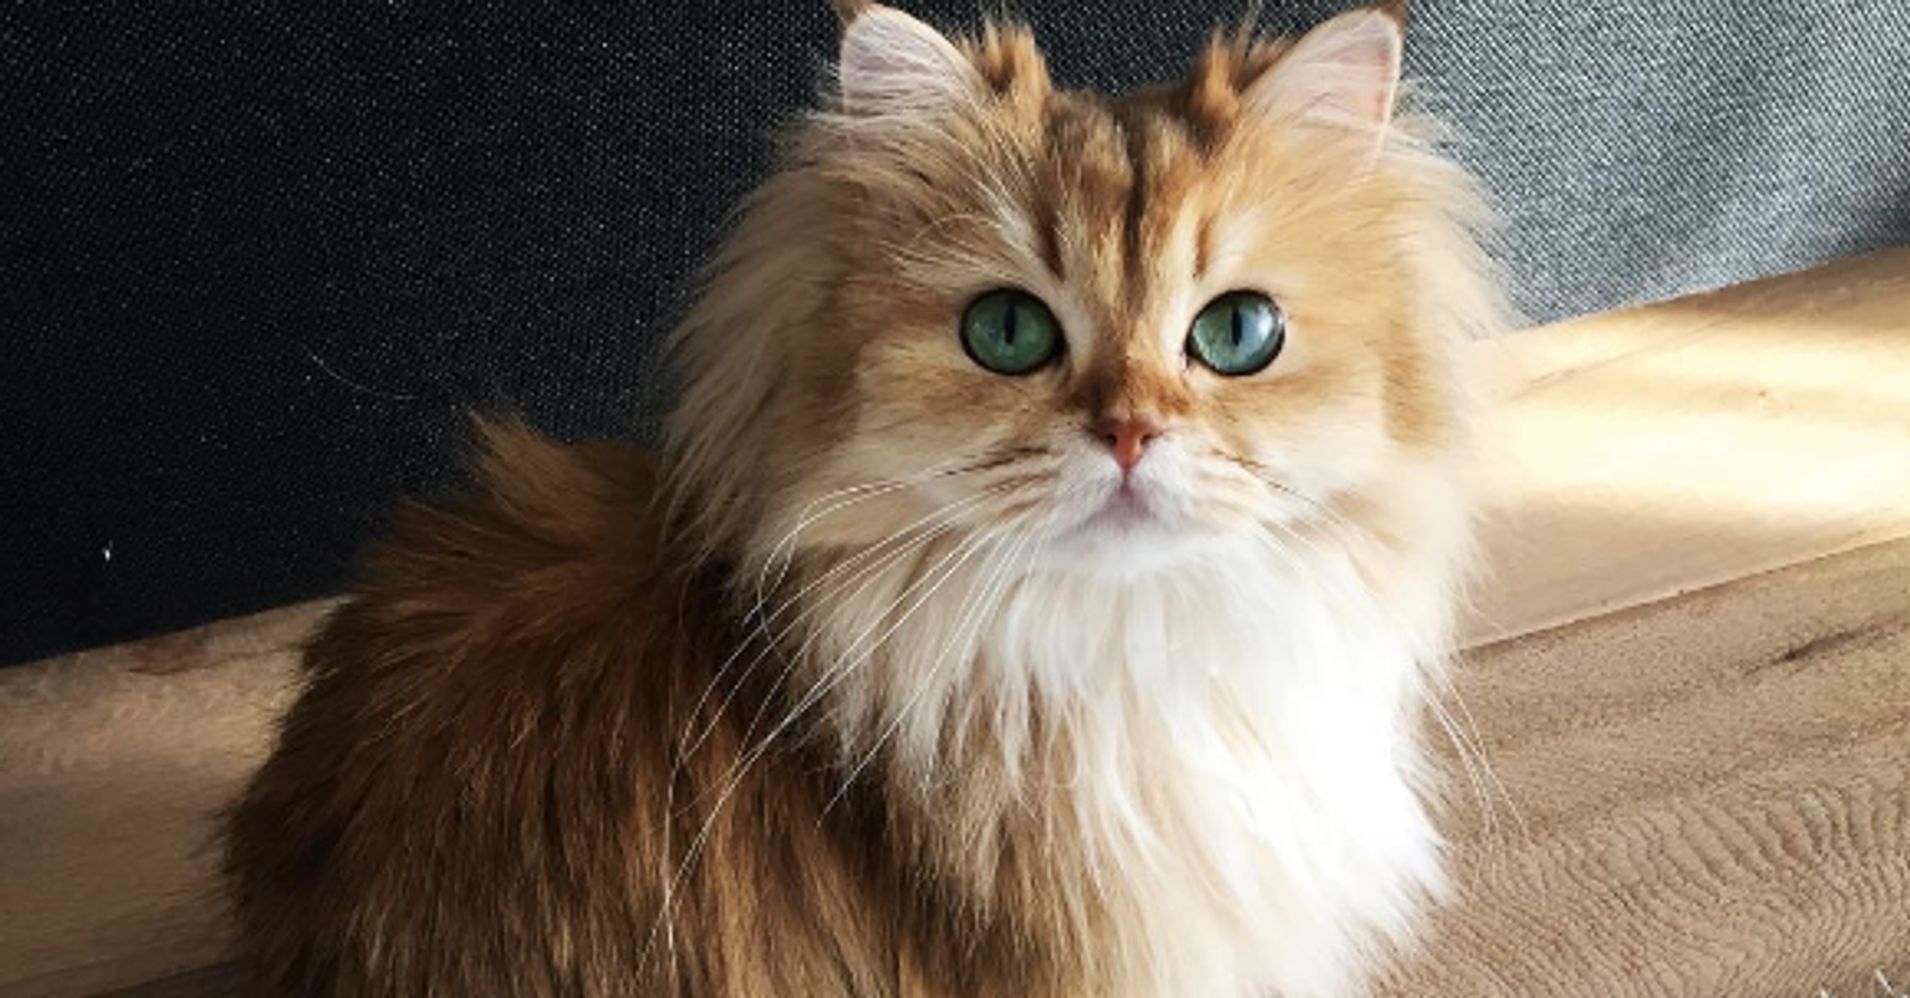 This May Be The Prettiest Cat In The World | HuffPost - 1910 x 998 jpeg 220kB